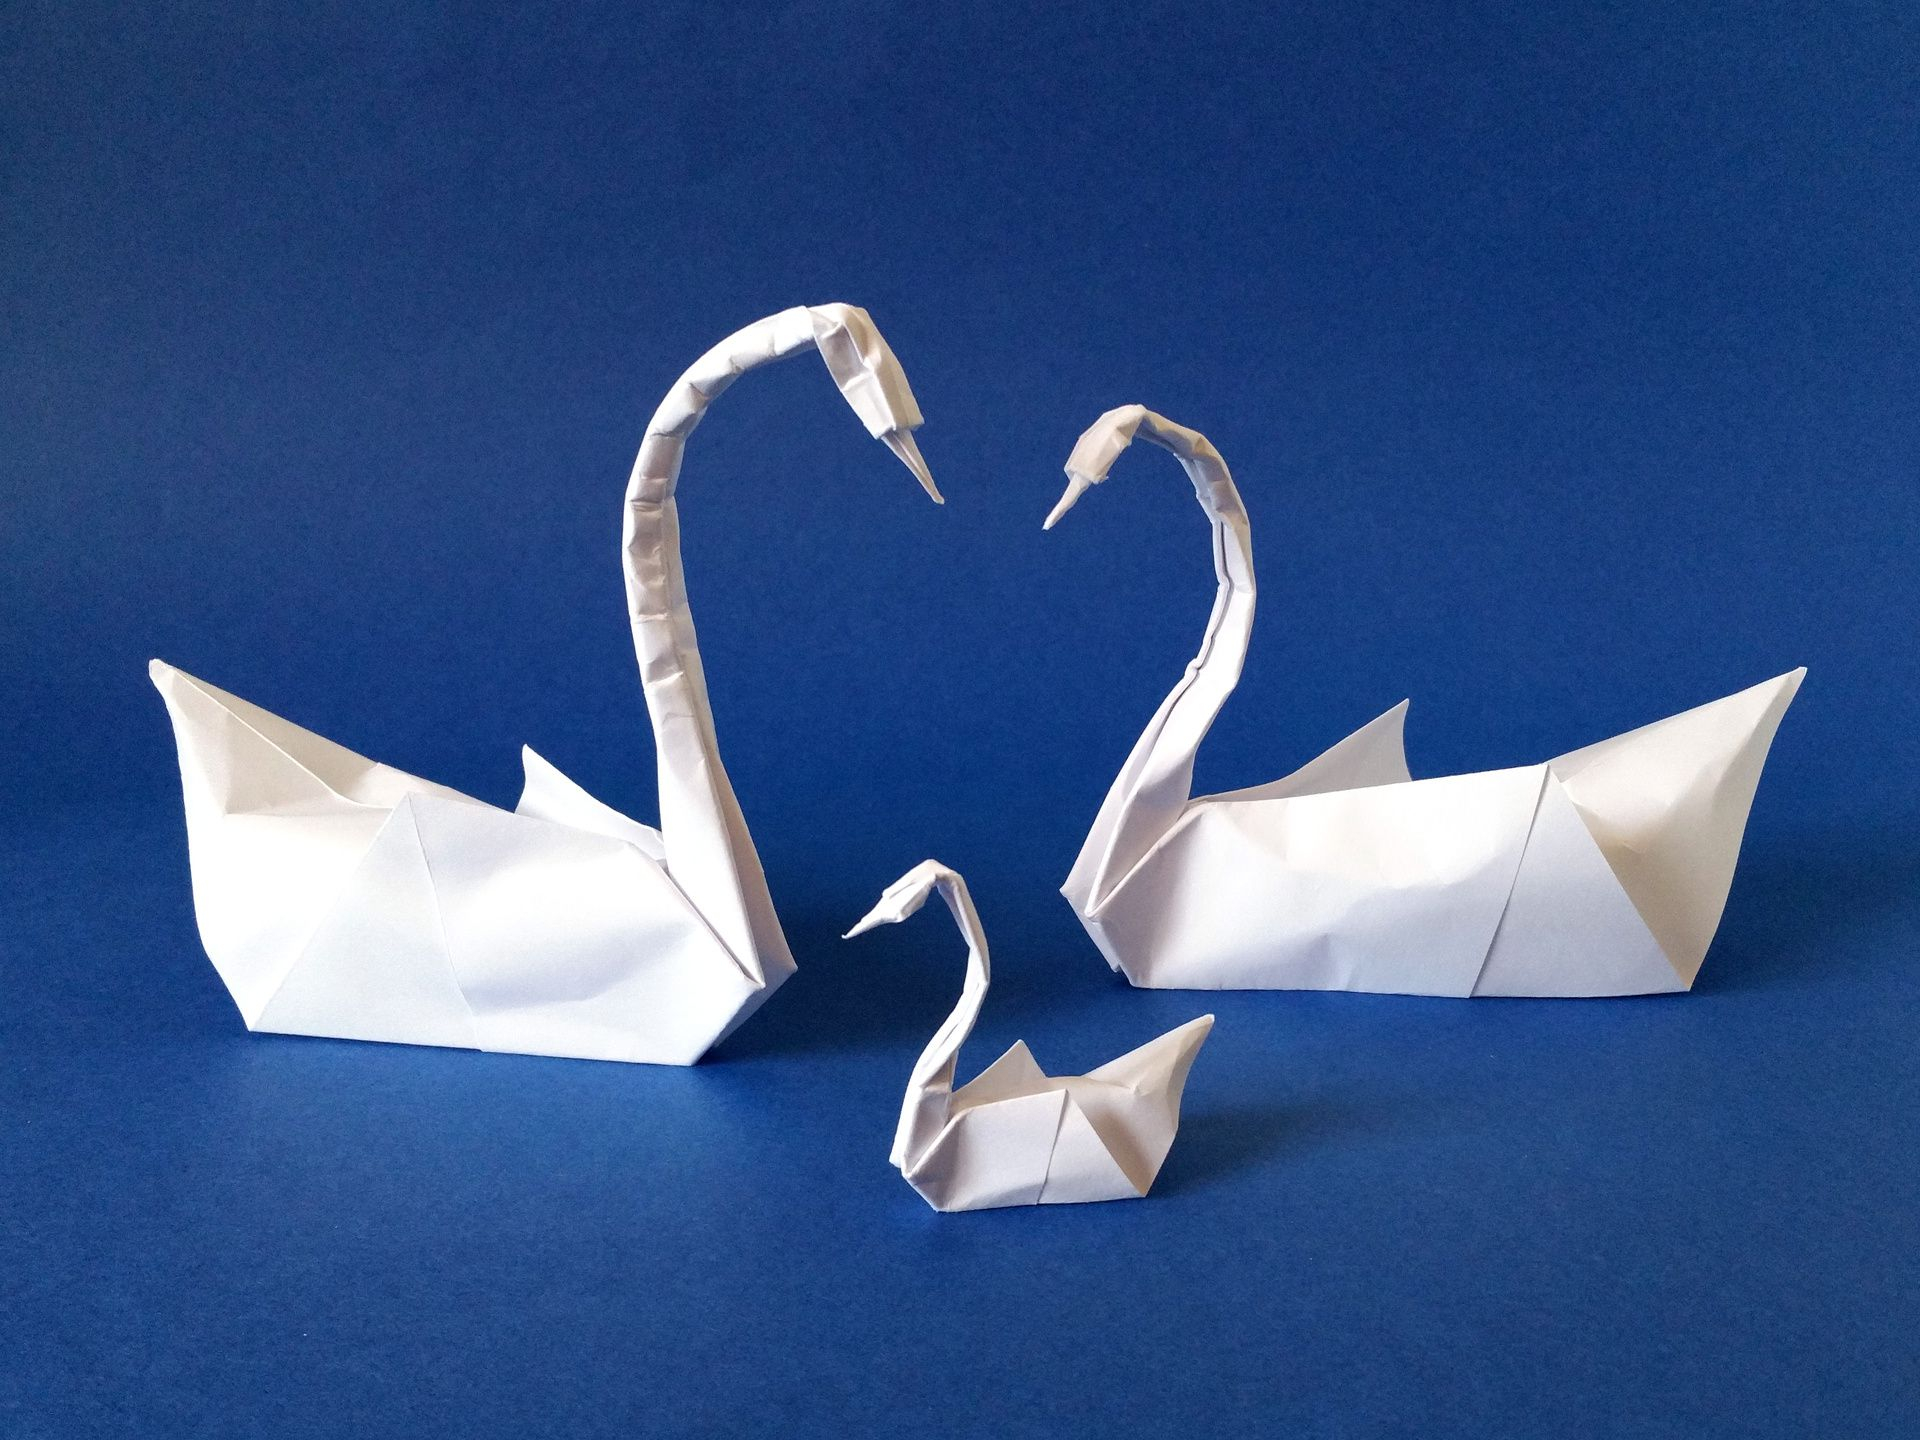 How To Make Origami Swans Origami Swans Couple And Swanling